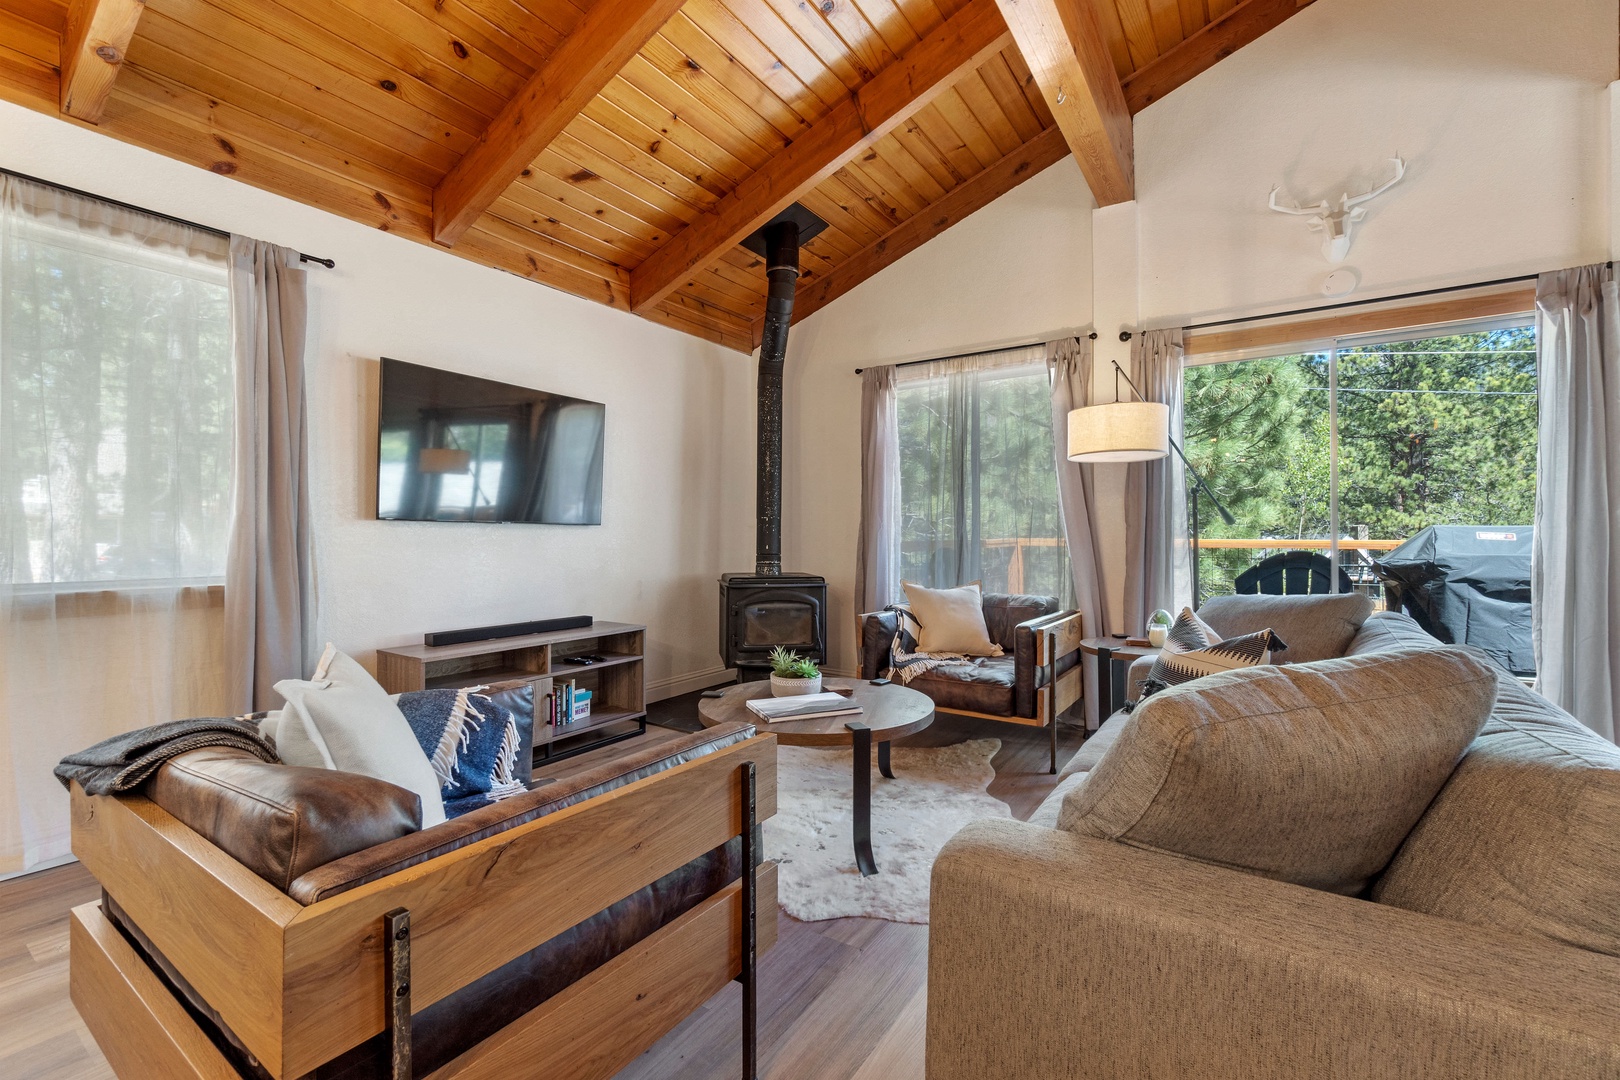 Living space with TV, wood burning stove, Smart TV, and deck access